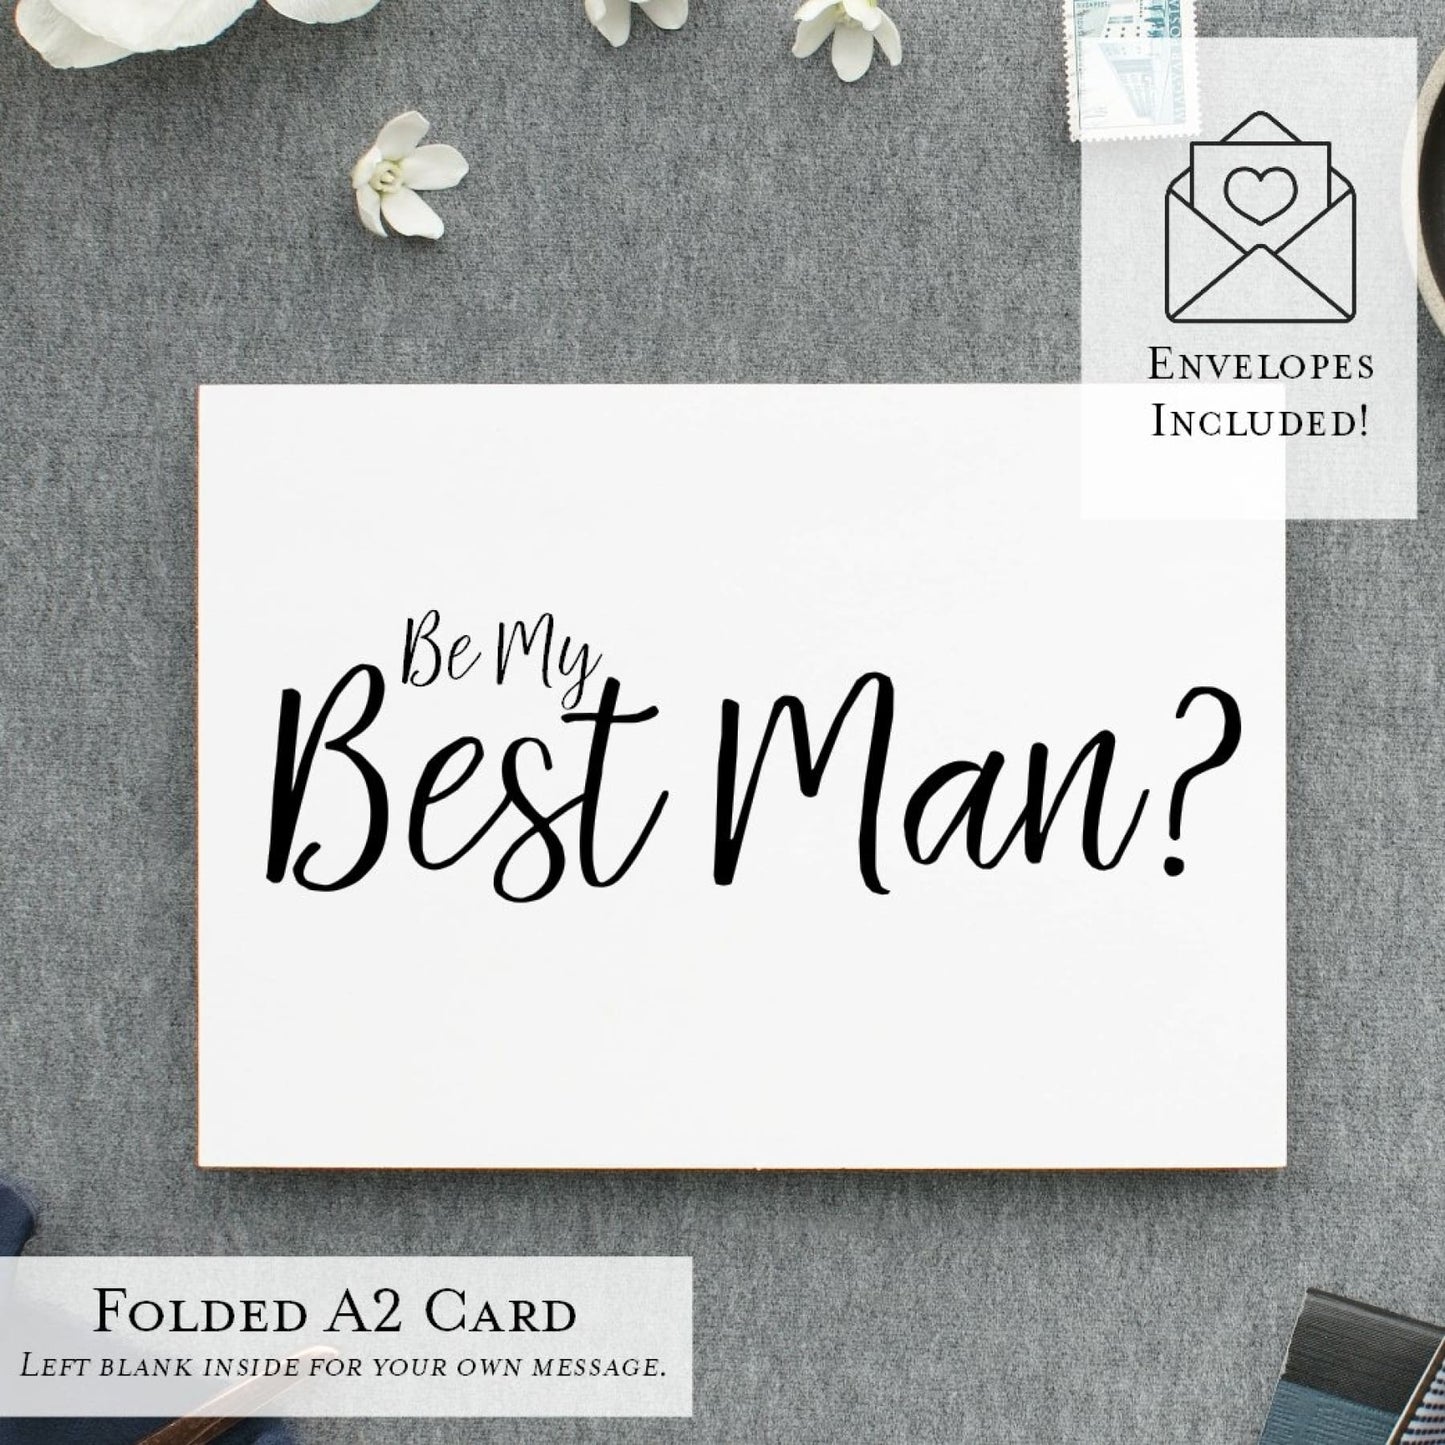 Will You Be My...? Cards, Wedding Party Proposal Cards, Style D - All That Glitters Invitations